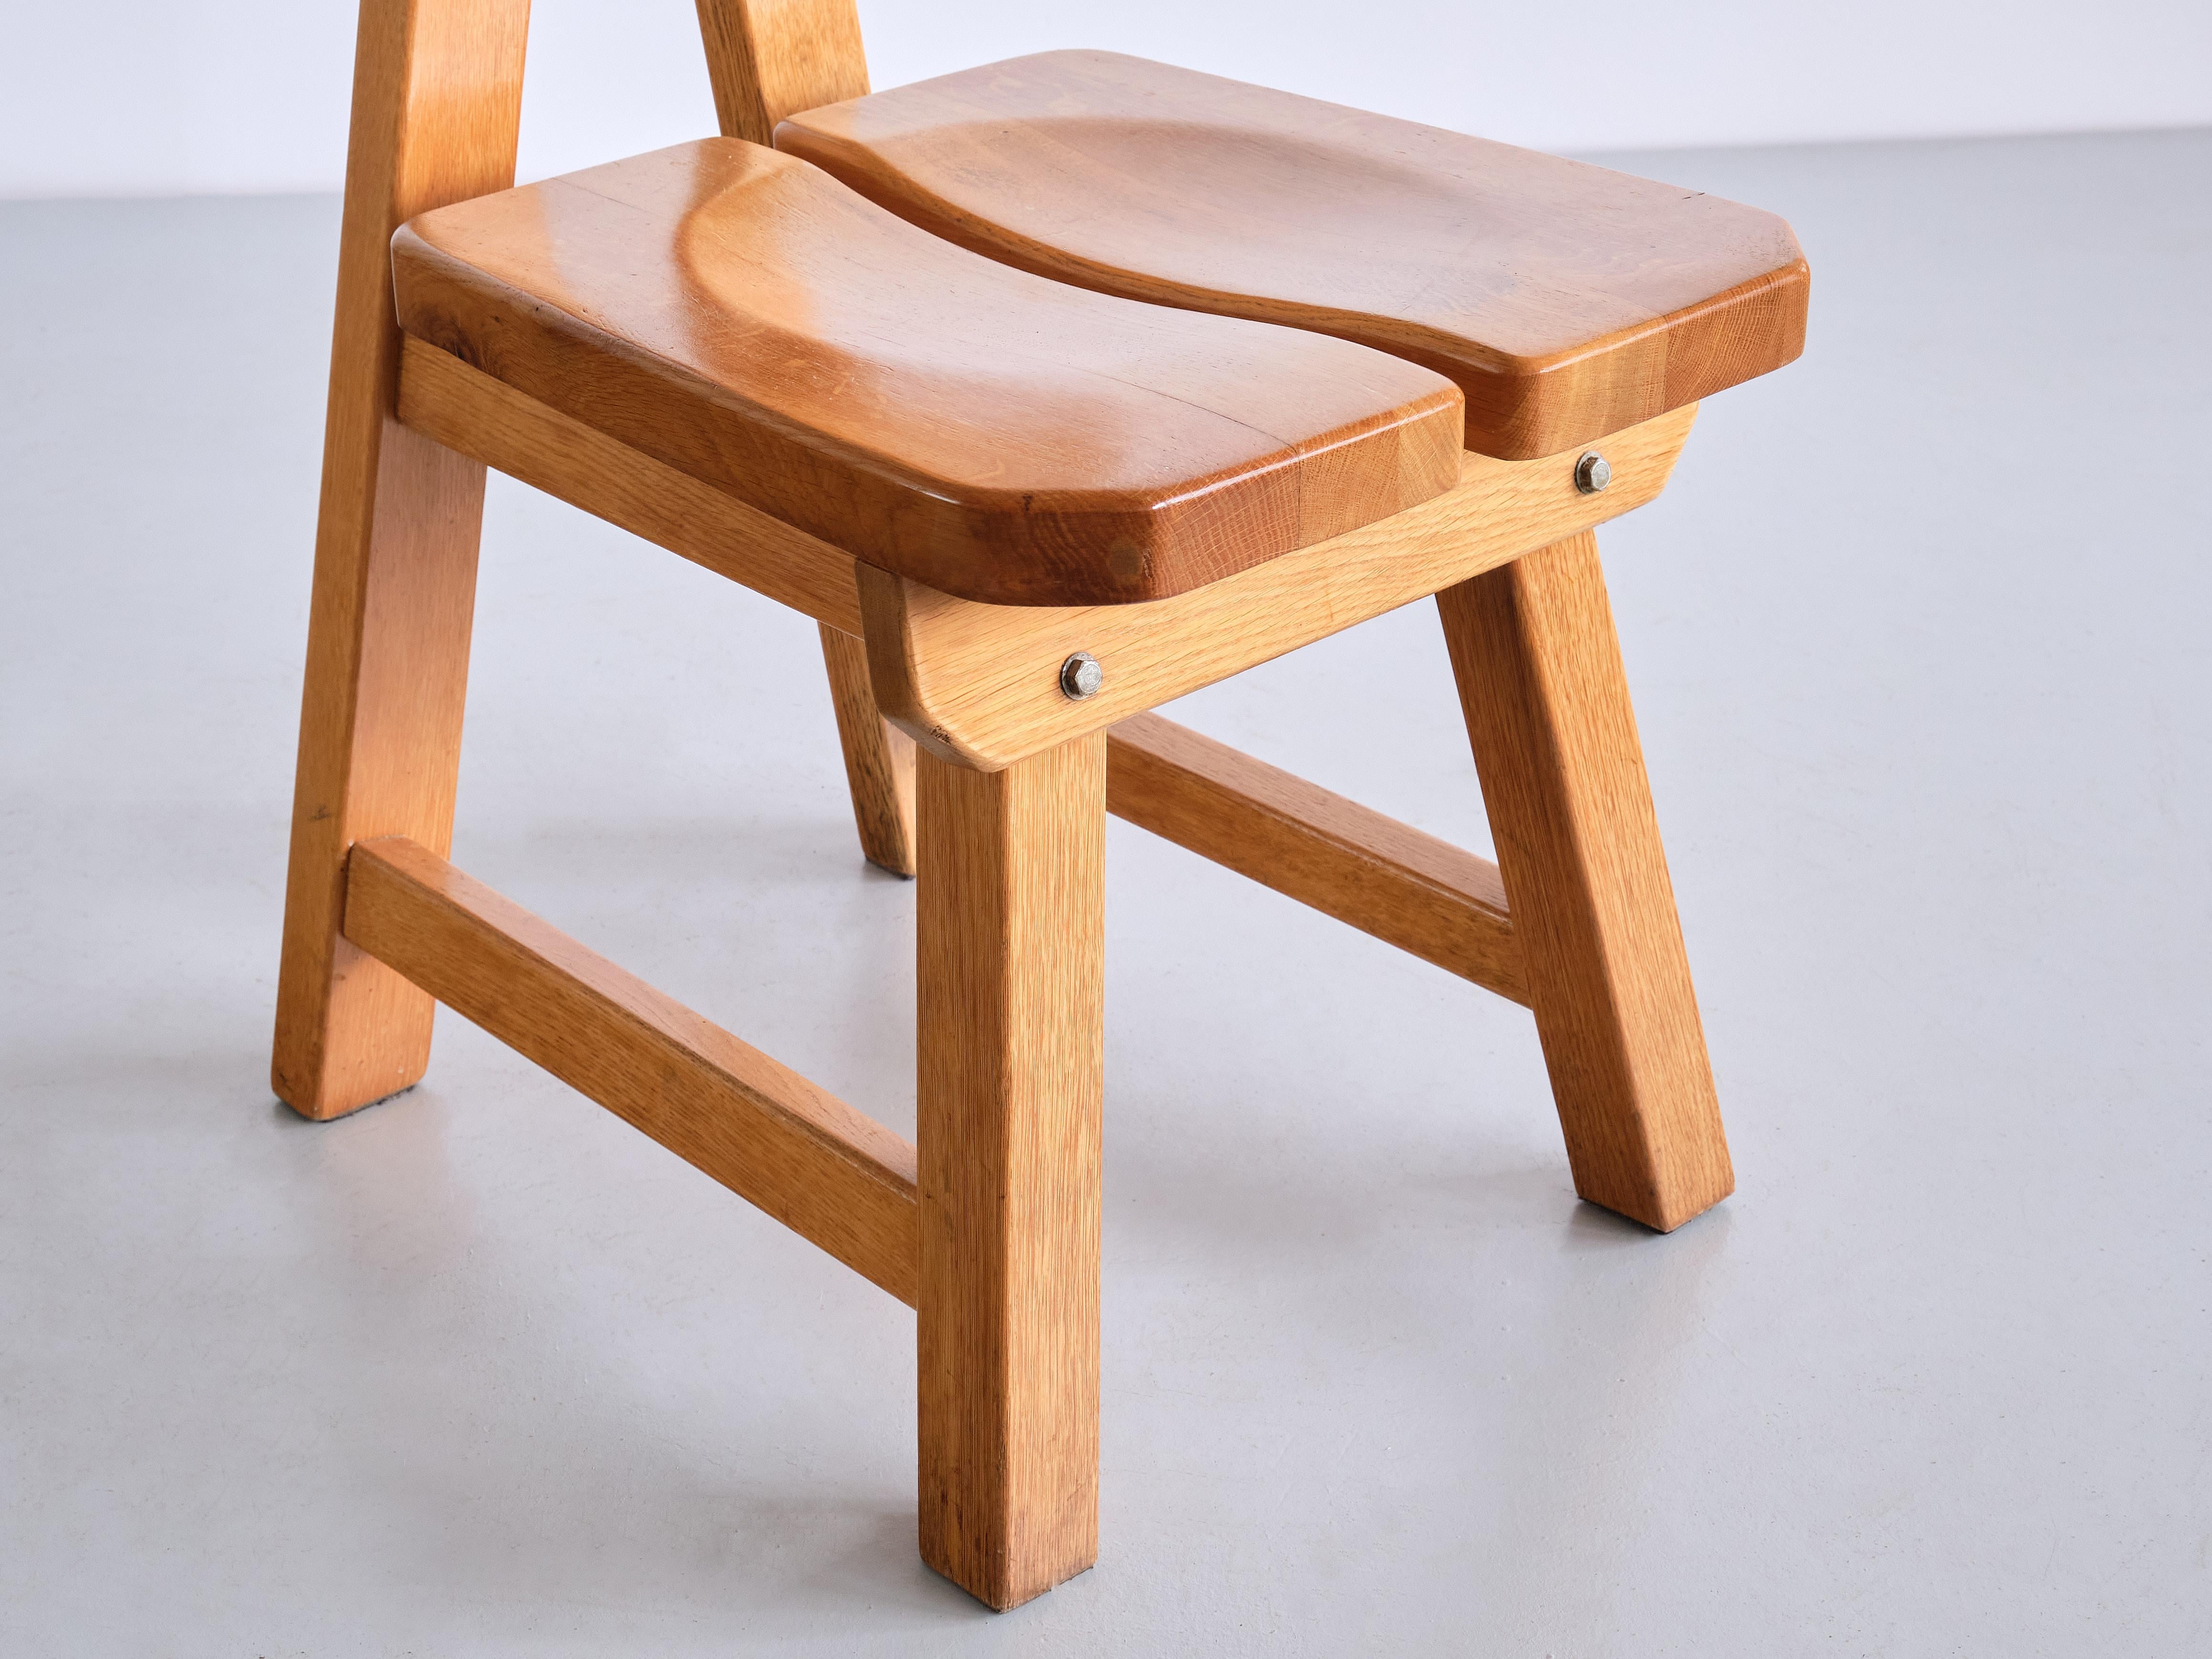 Sculptural Set of Six Brutalist Dining Chairs in Solid Oak, France, 1960s For Sale 10